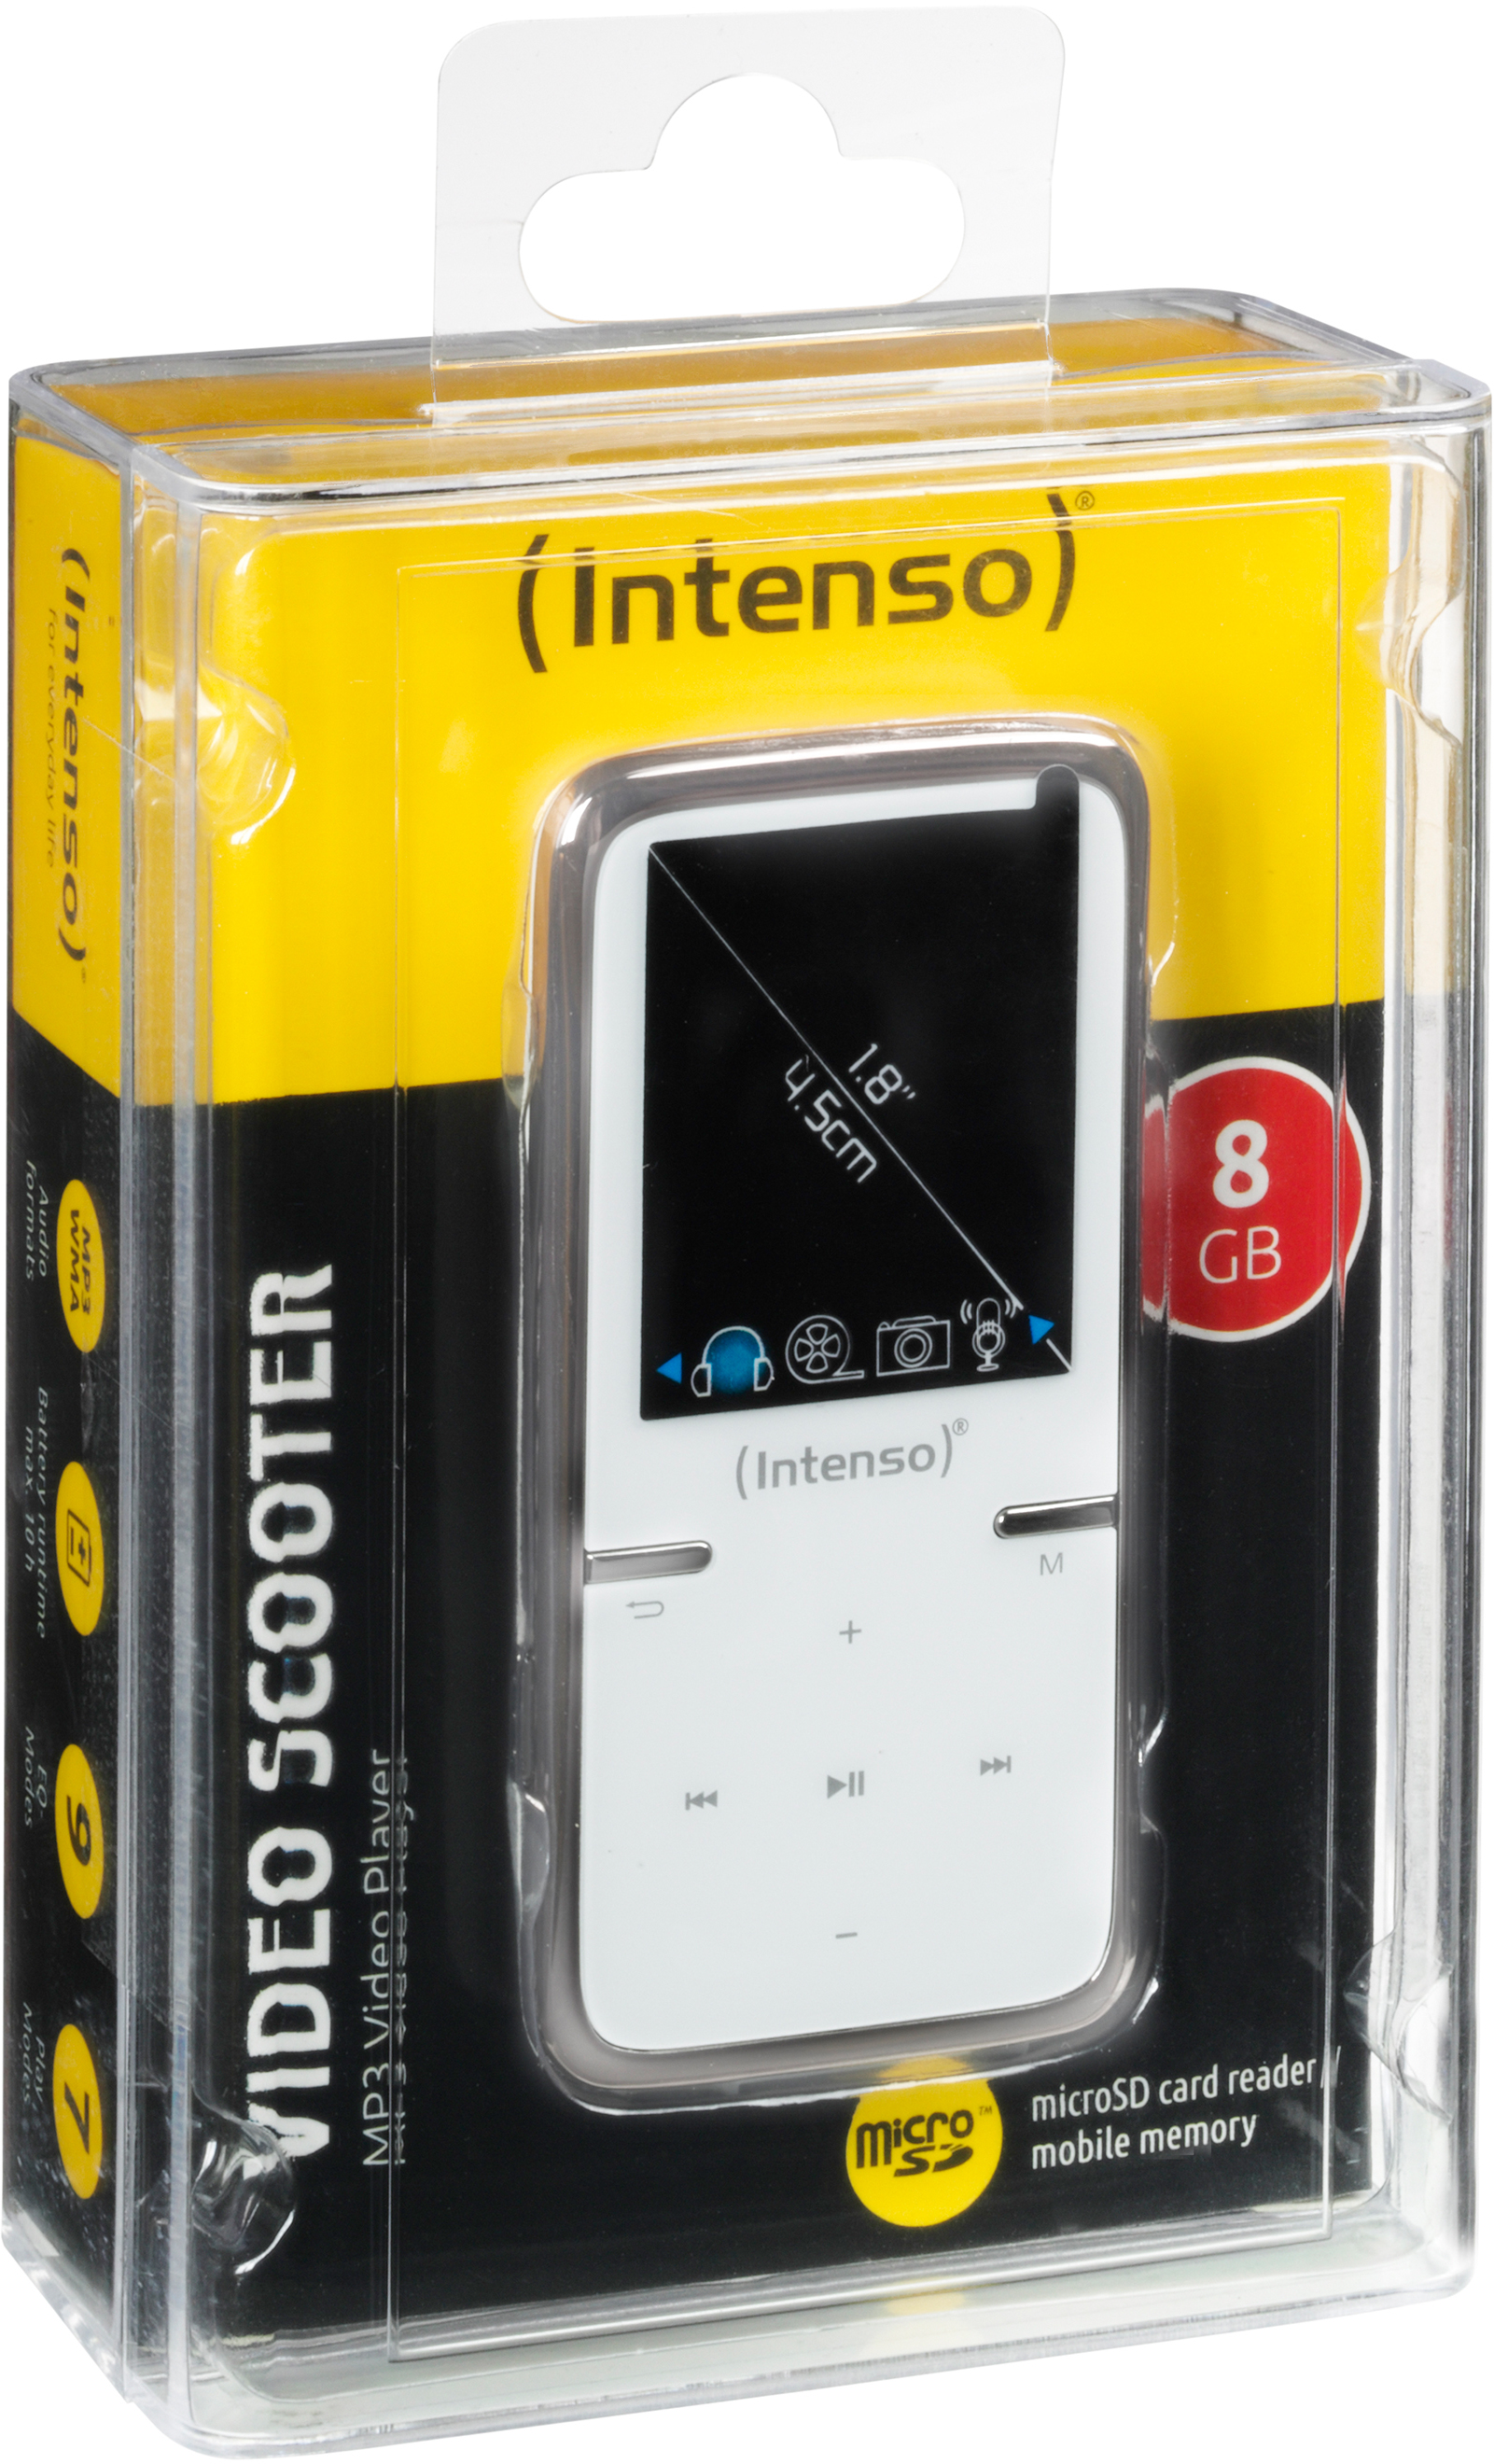 GB, Video Mp3-Player INTENSO Scooter Weiß 8